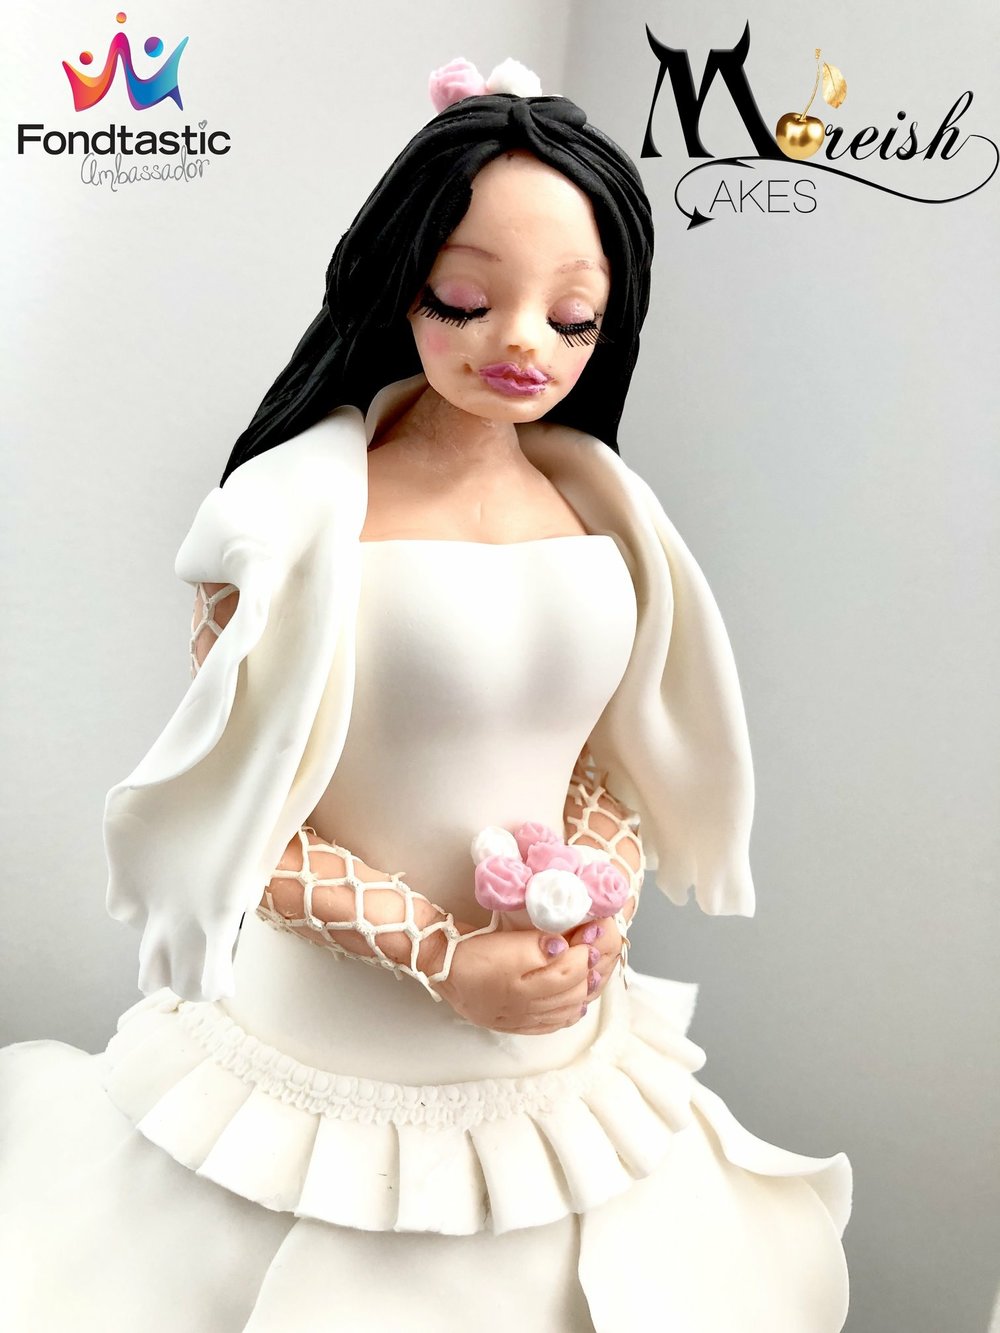 Doll Cake - The Question and Answer Blog